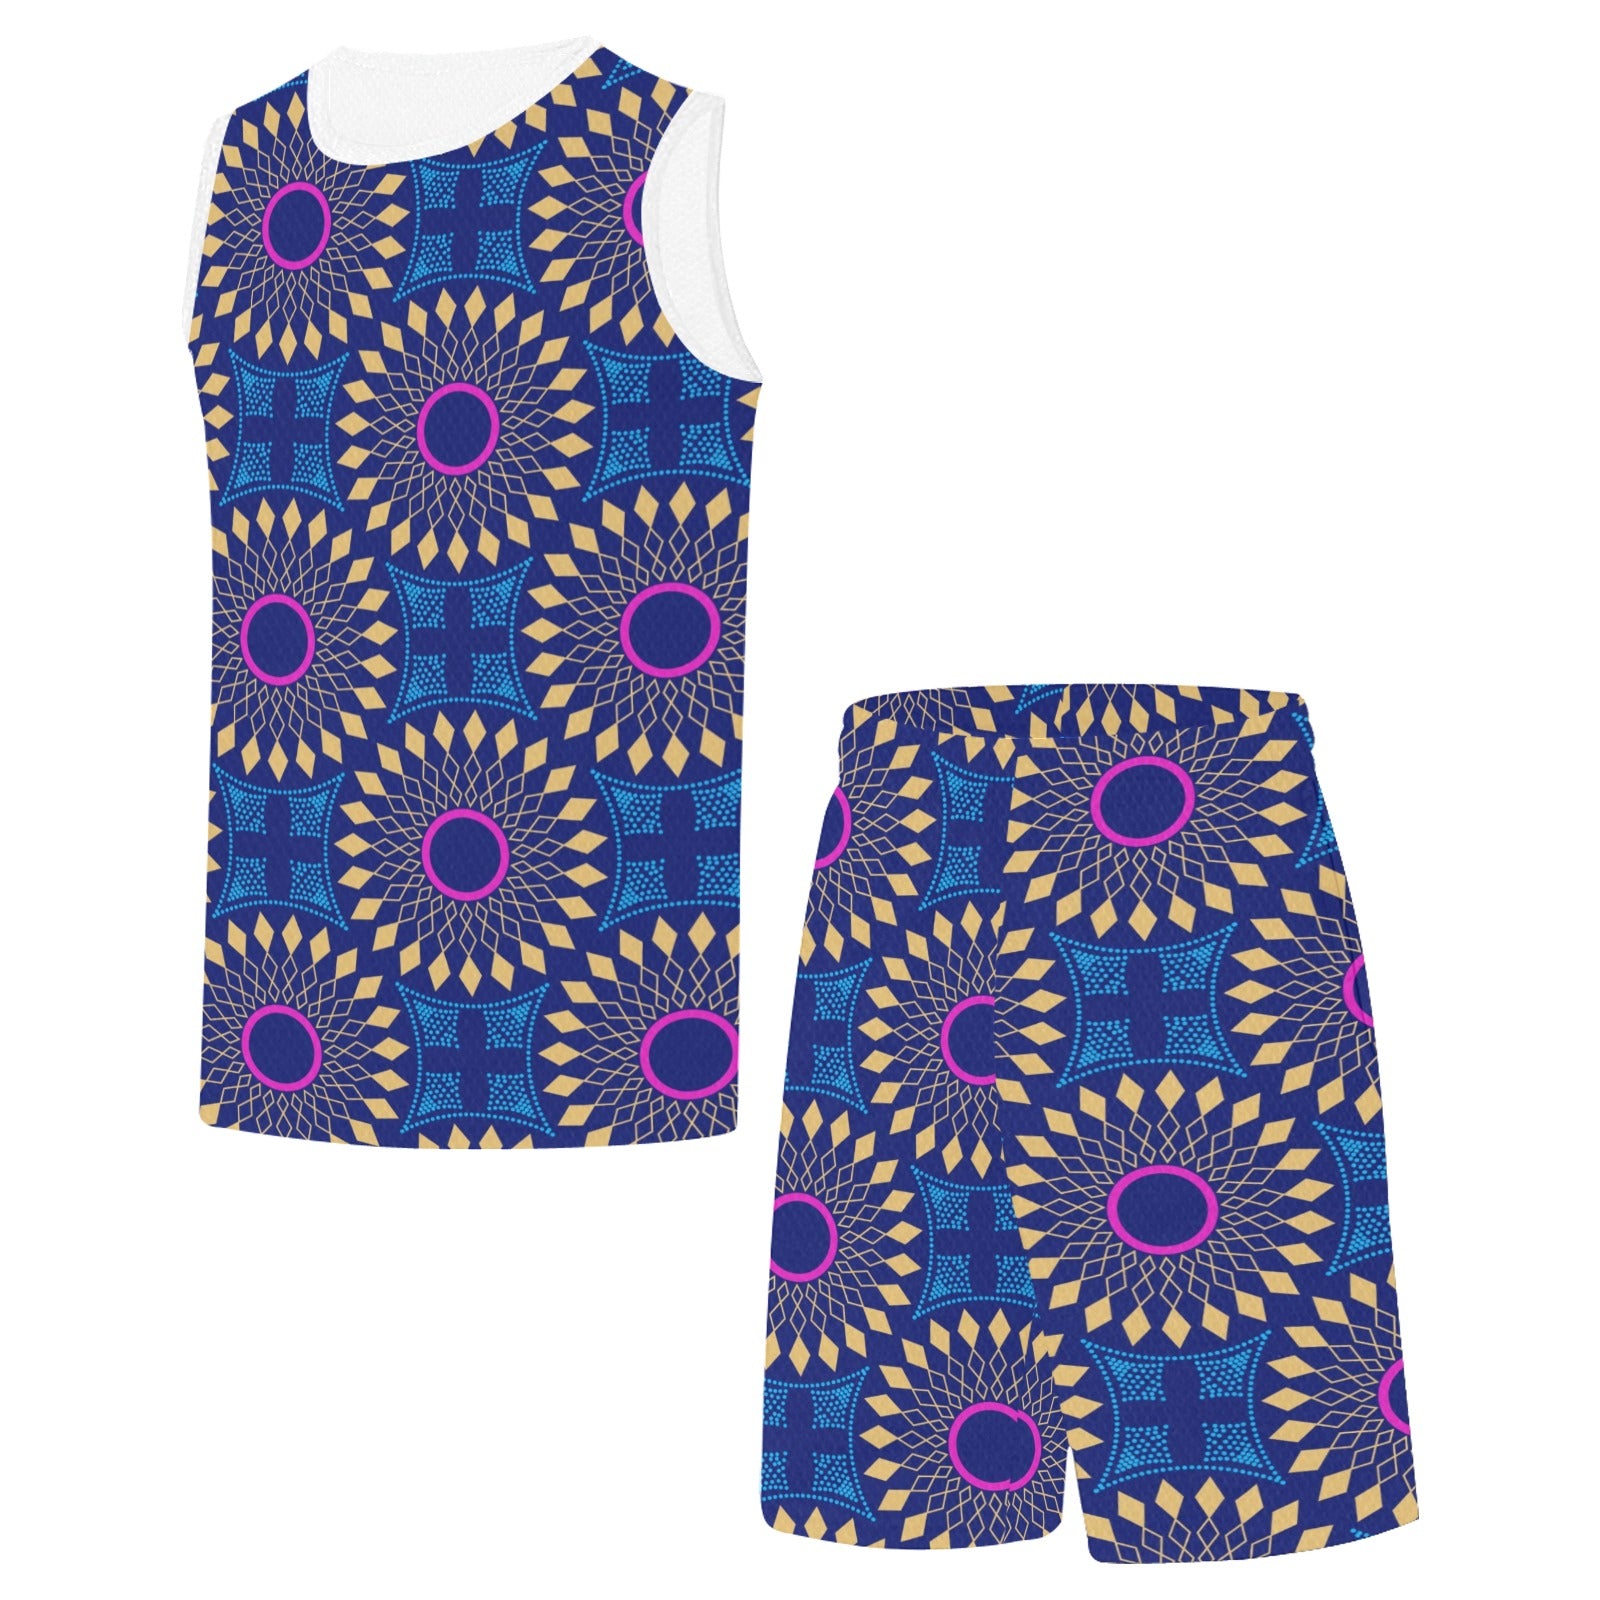 Tosin African Print Basketball Uniform with Pocket